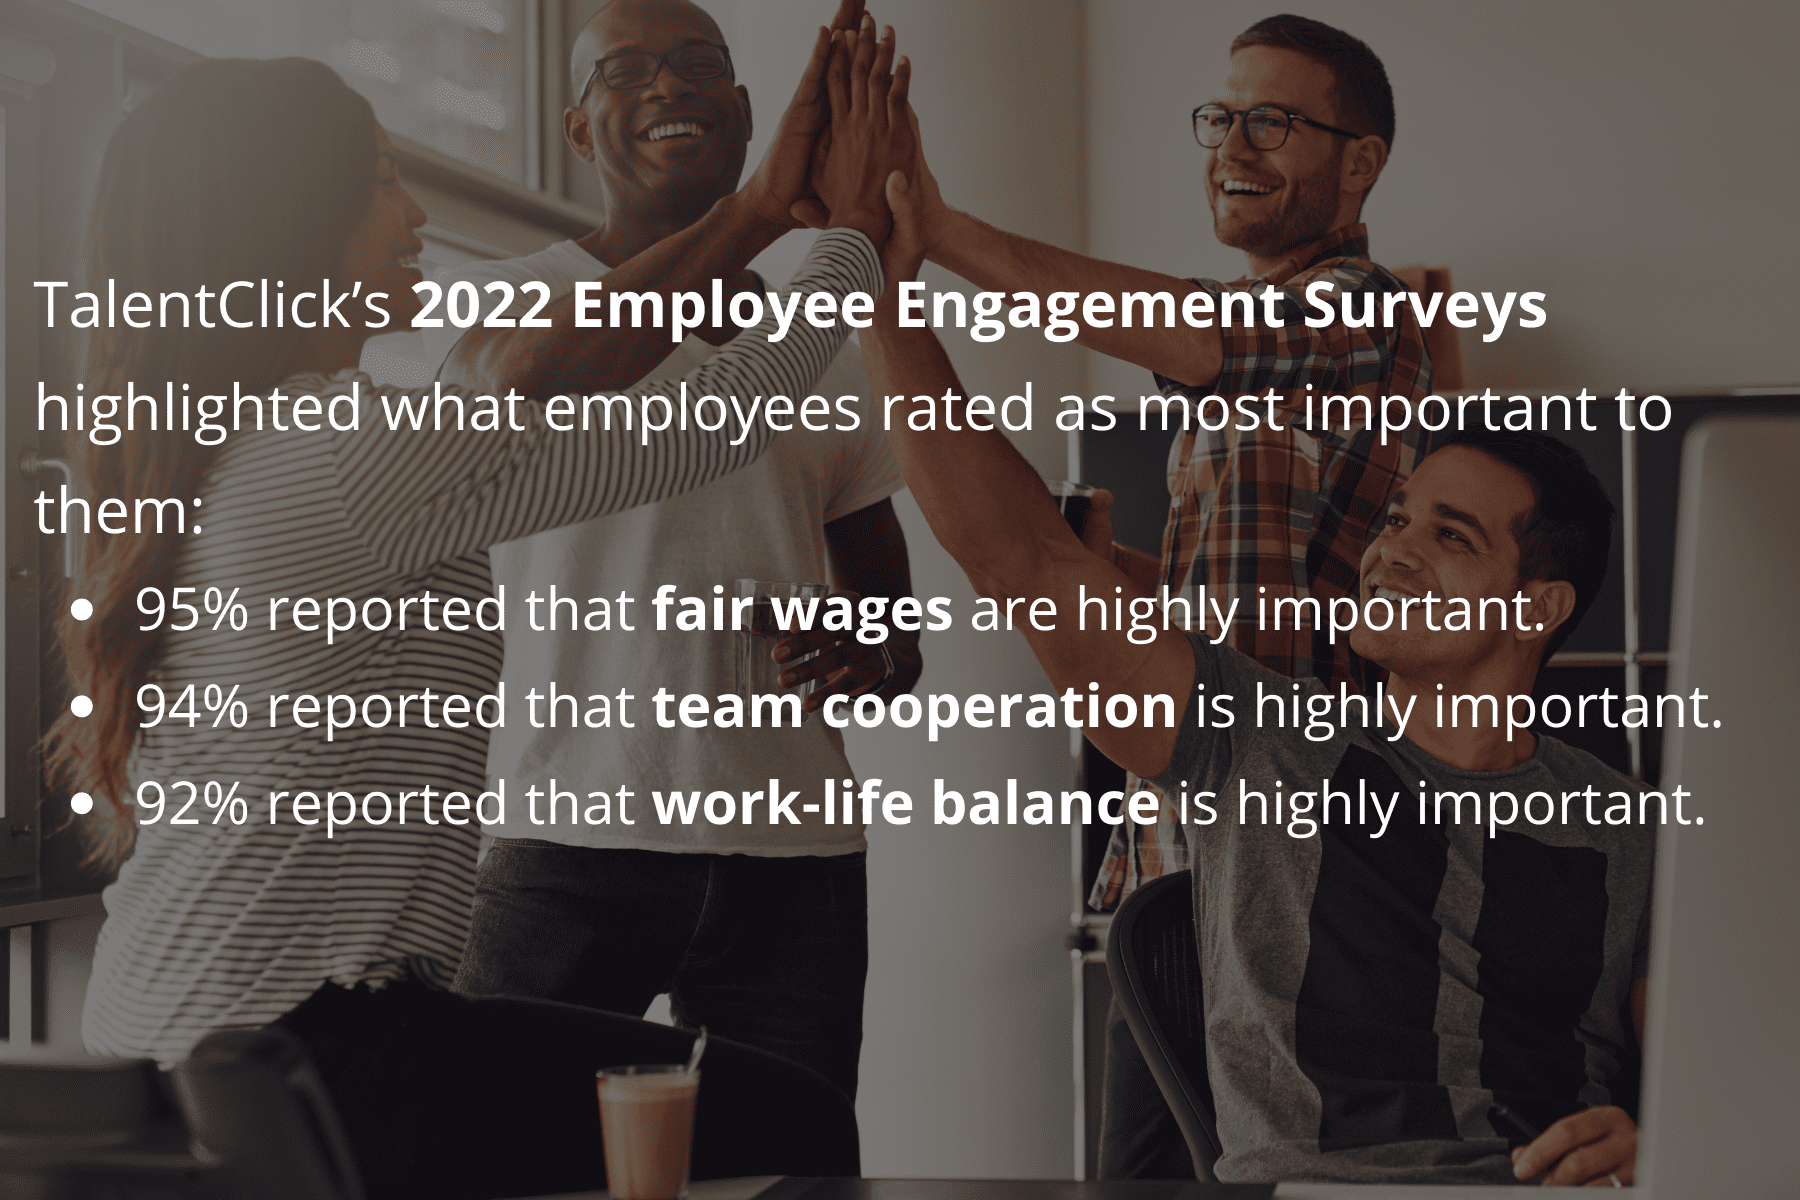 3 Things You Need to Know about Employee Engagement Surveys - TalentClick